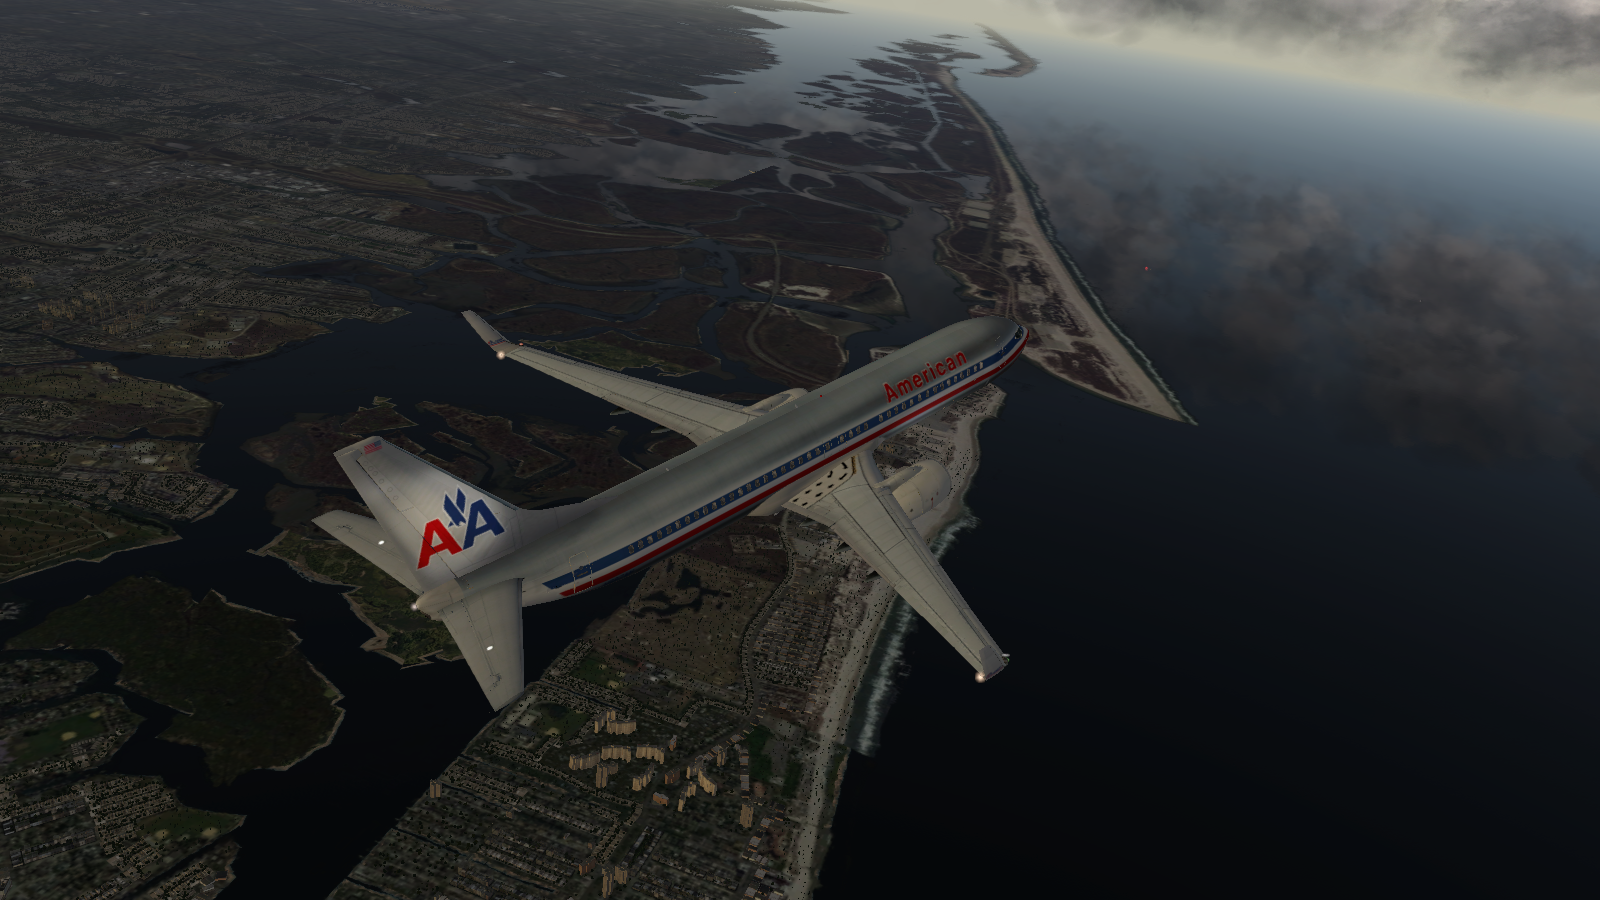 737 over NYC